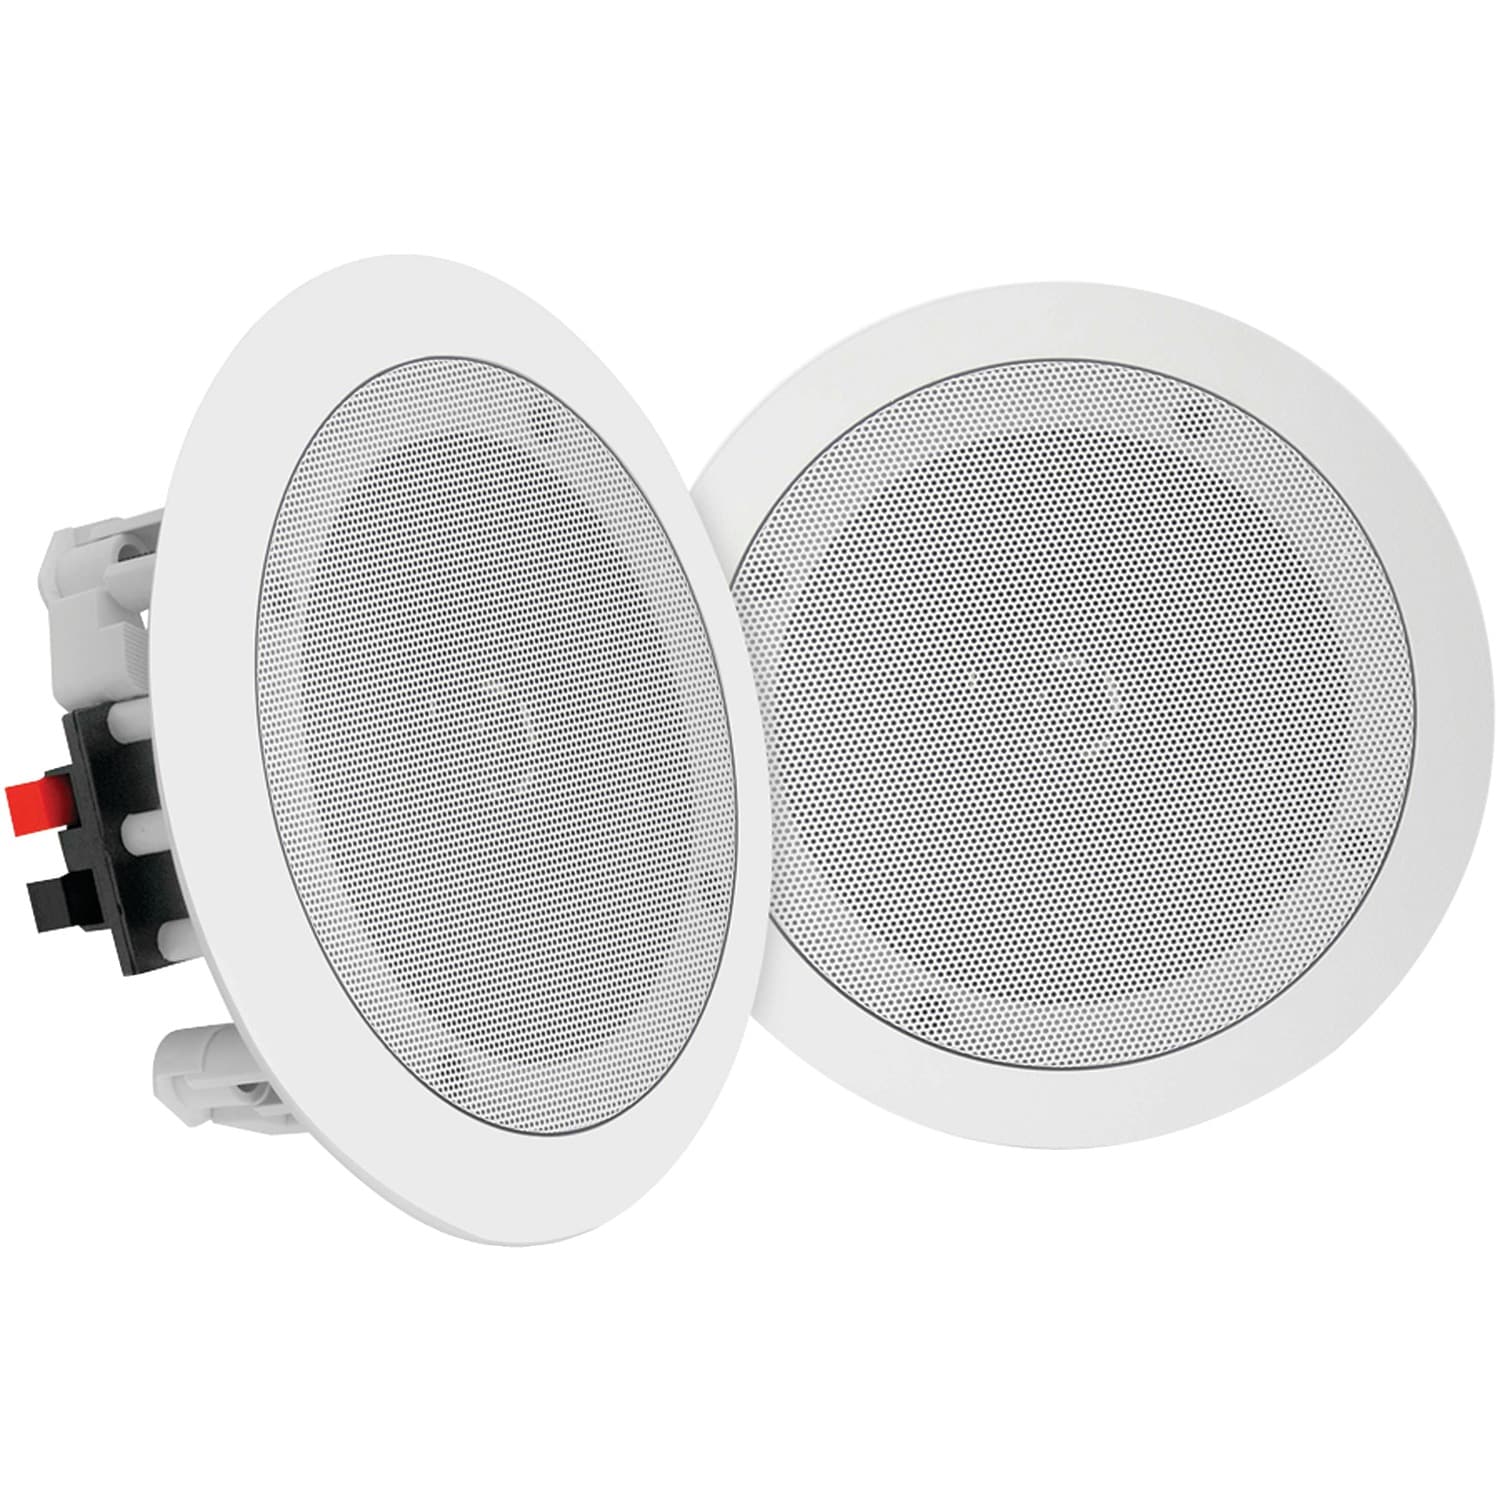 Pyle Home 9 5 In 250 Watt Set Of 2 Bluetooth Compatibility Indoor Ceiling Speaker The Speakers Department At Lowes Com